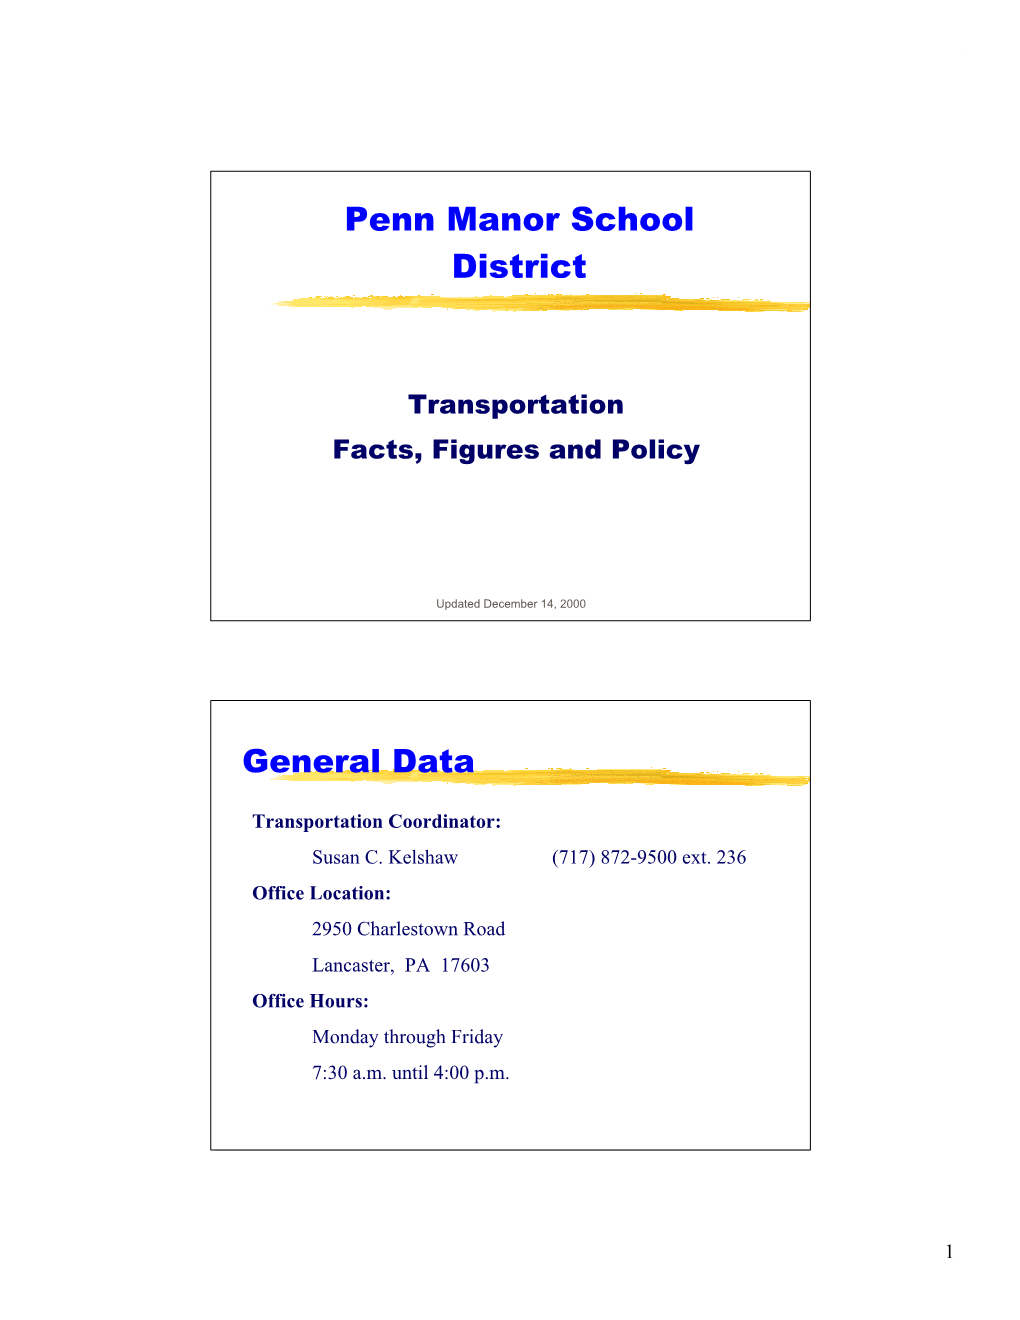 Transportation Facts, Figures and Policy